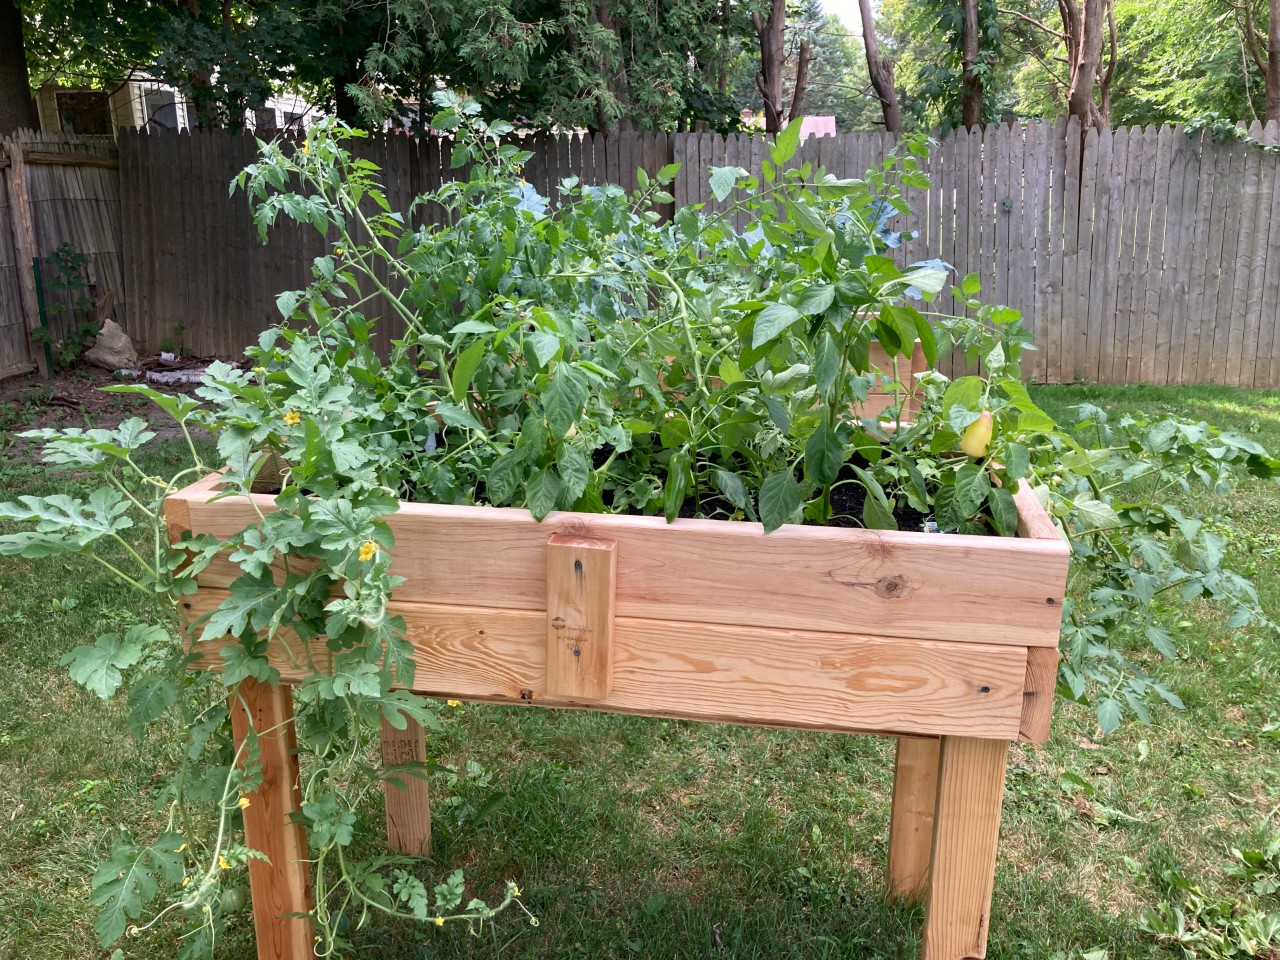 Raised garden bed filled with vegetables